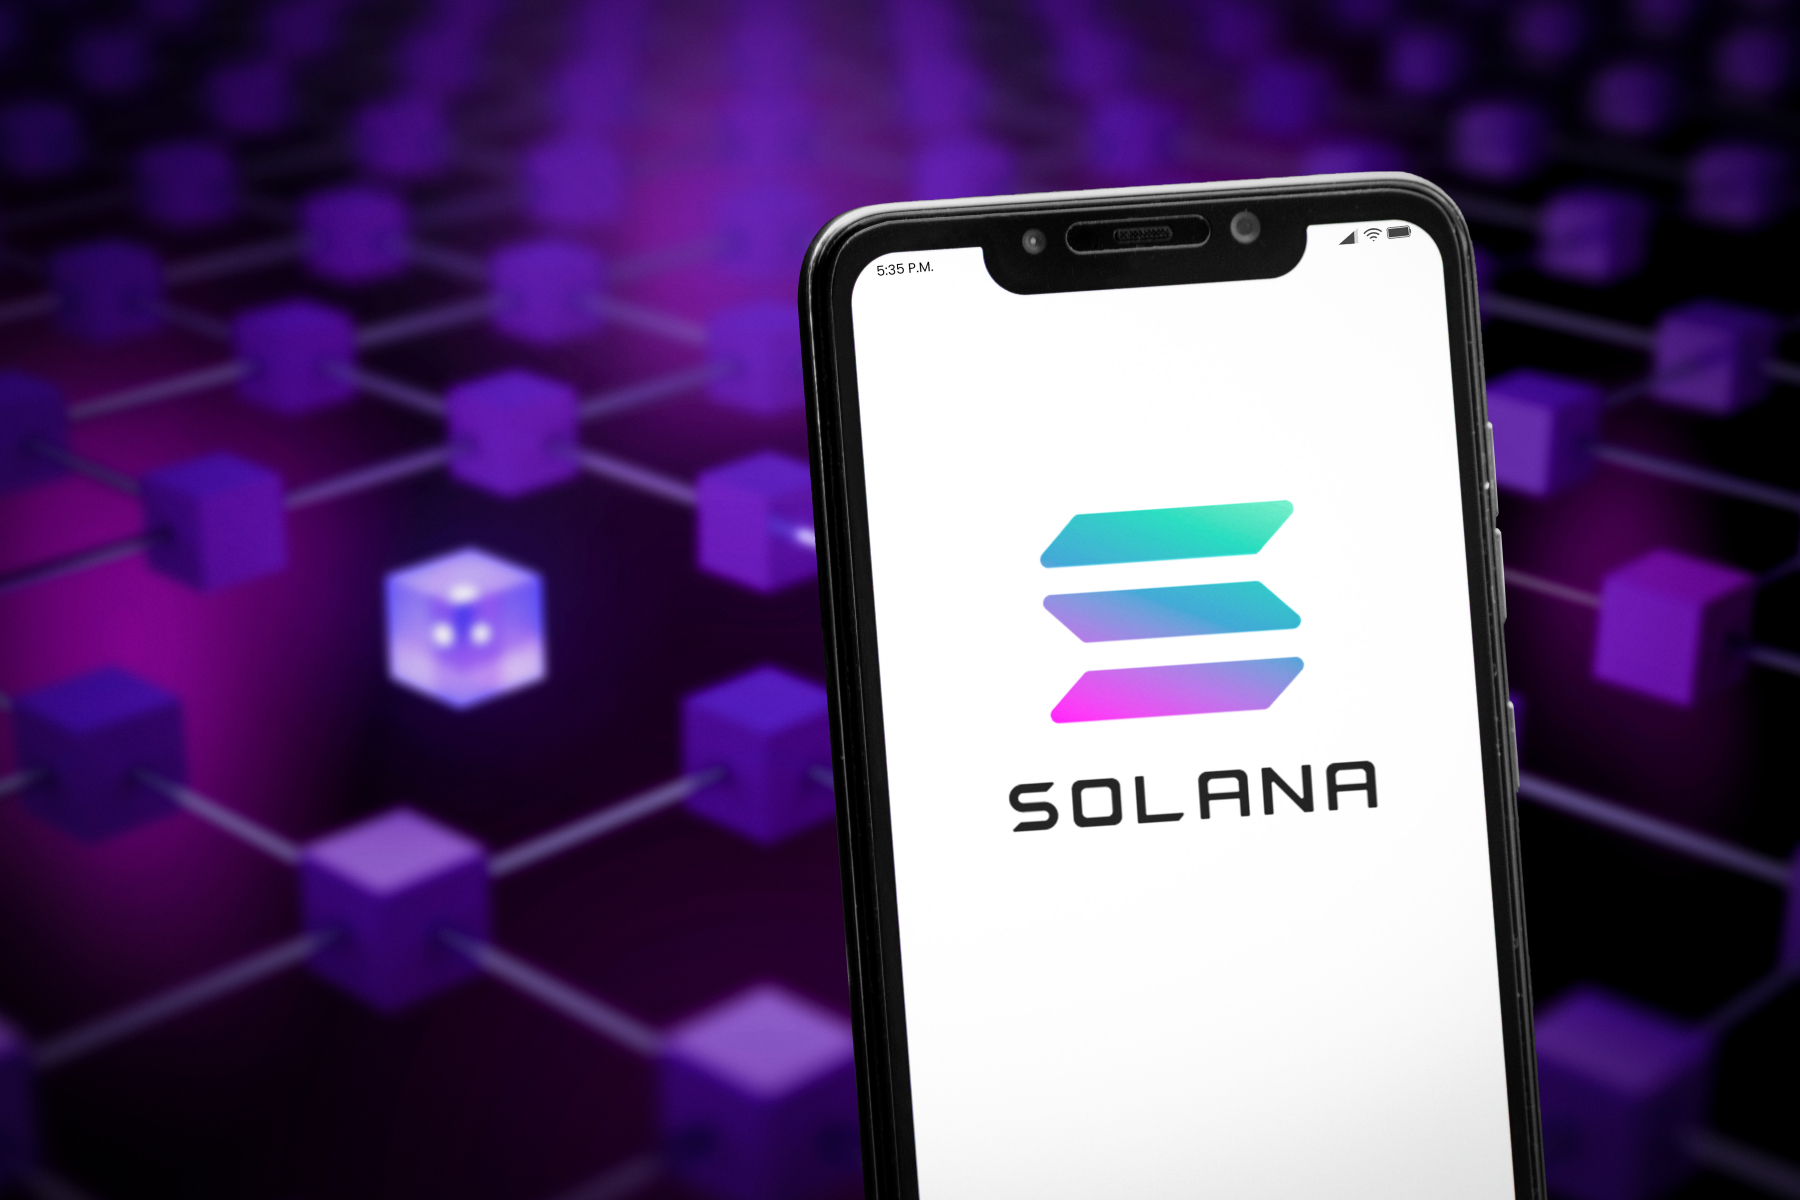 Deep-dive: The link between Solana and FTX
